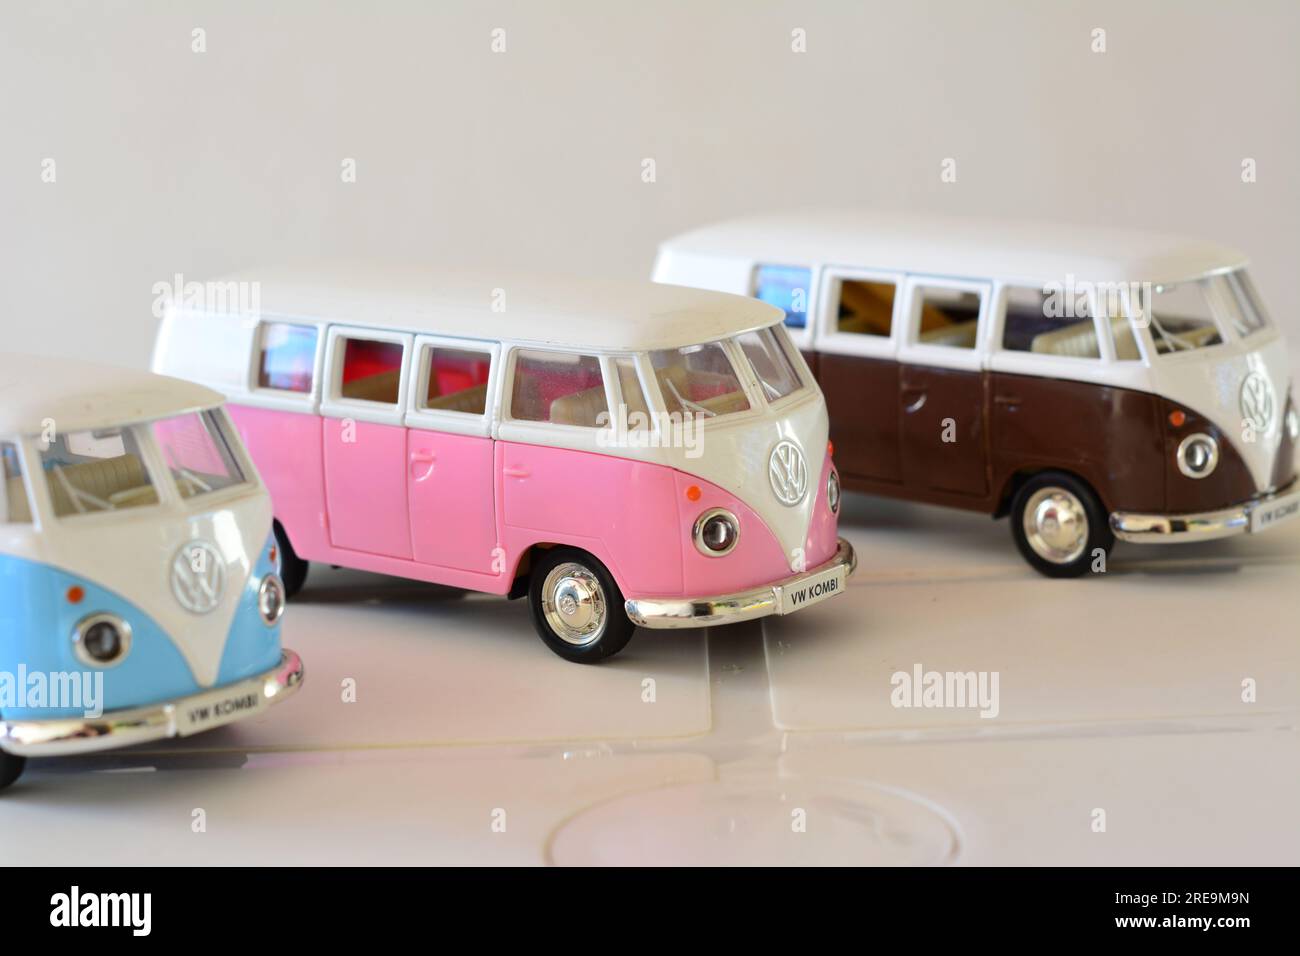 Iron miniature, Diecast, various color vans, Brazil, South America, side view, selective focus, white background, red color, intentional blur Stock Photo